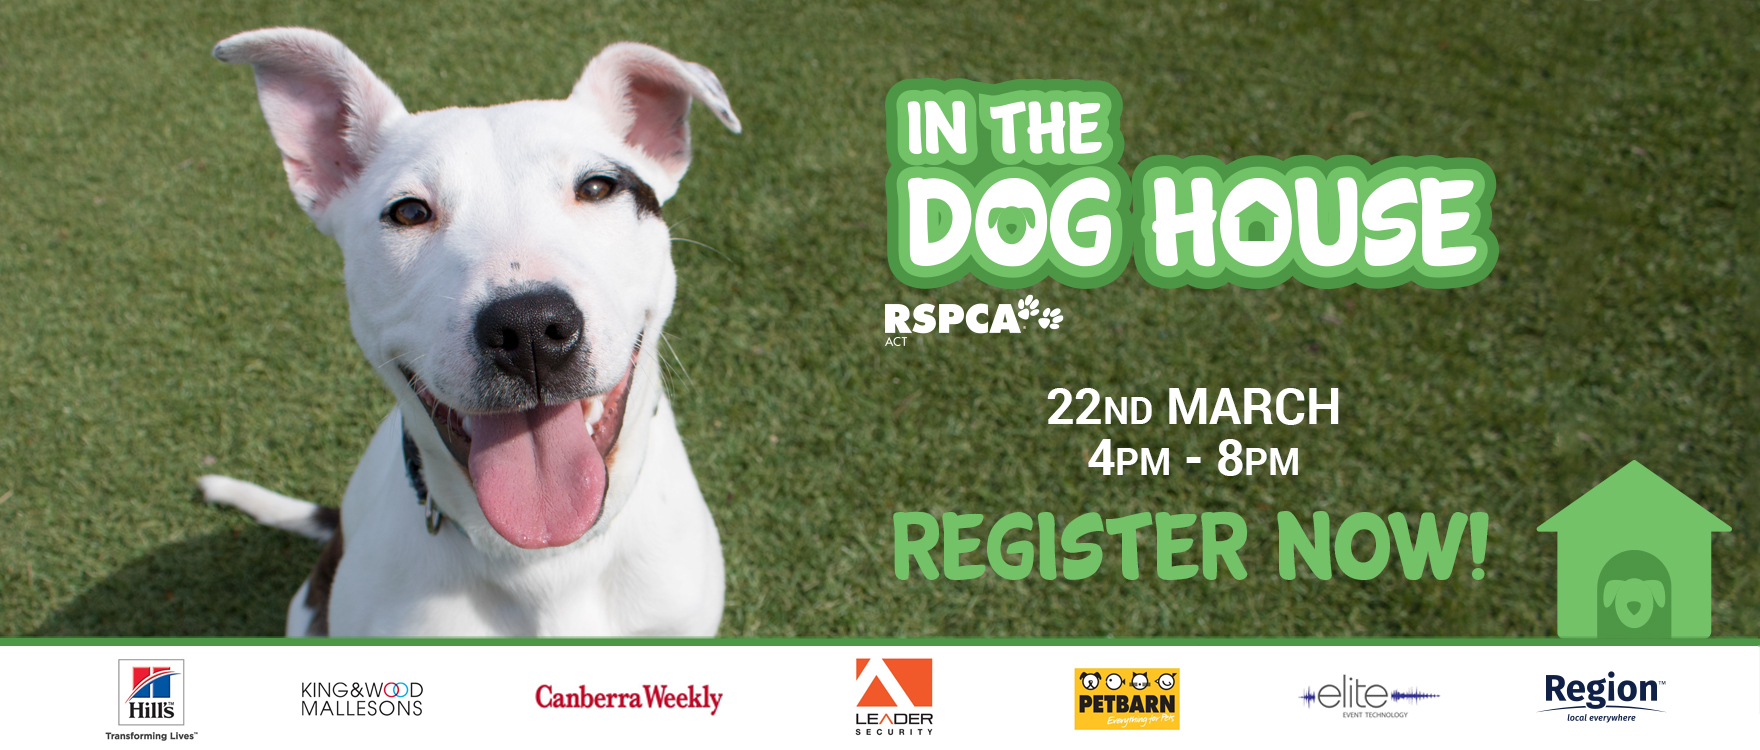 Register Now to go 'In the Dog House' 